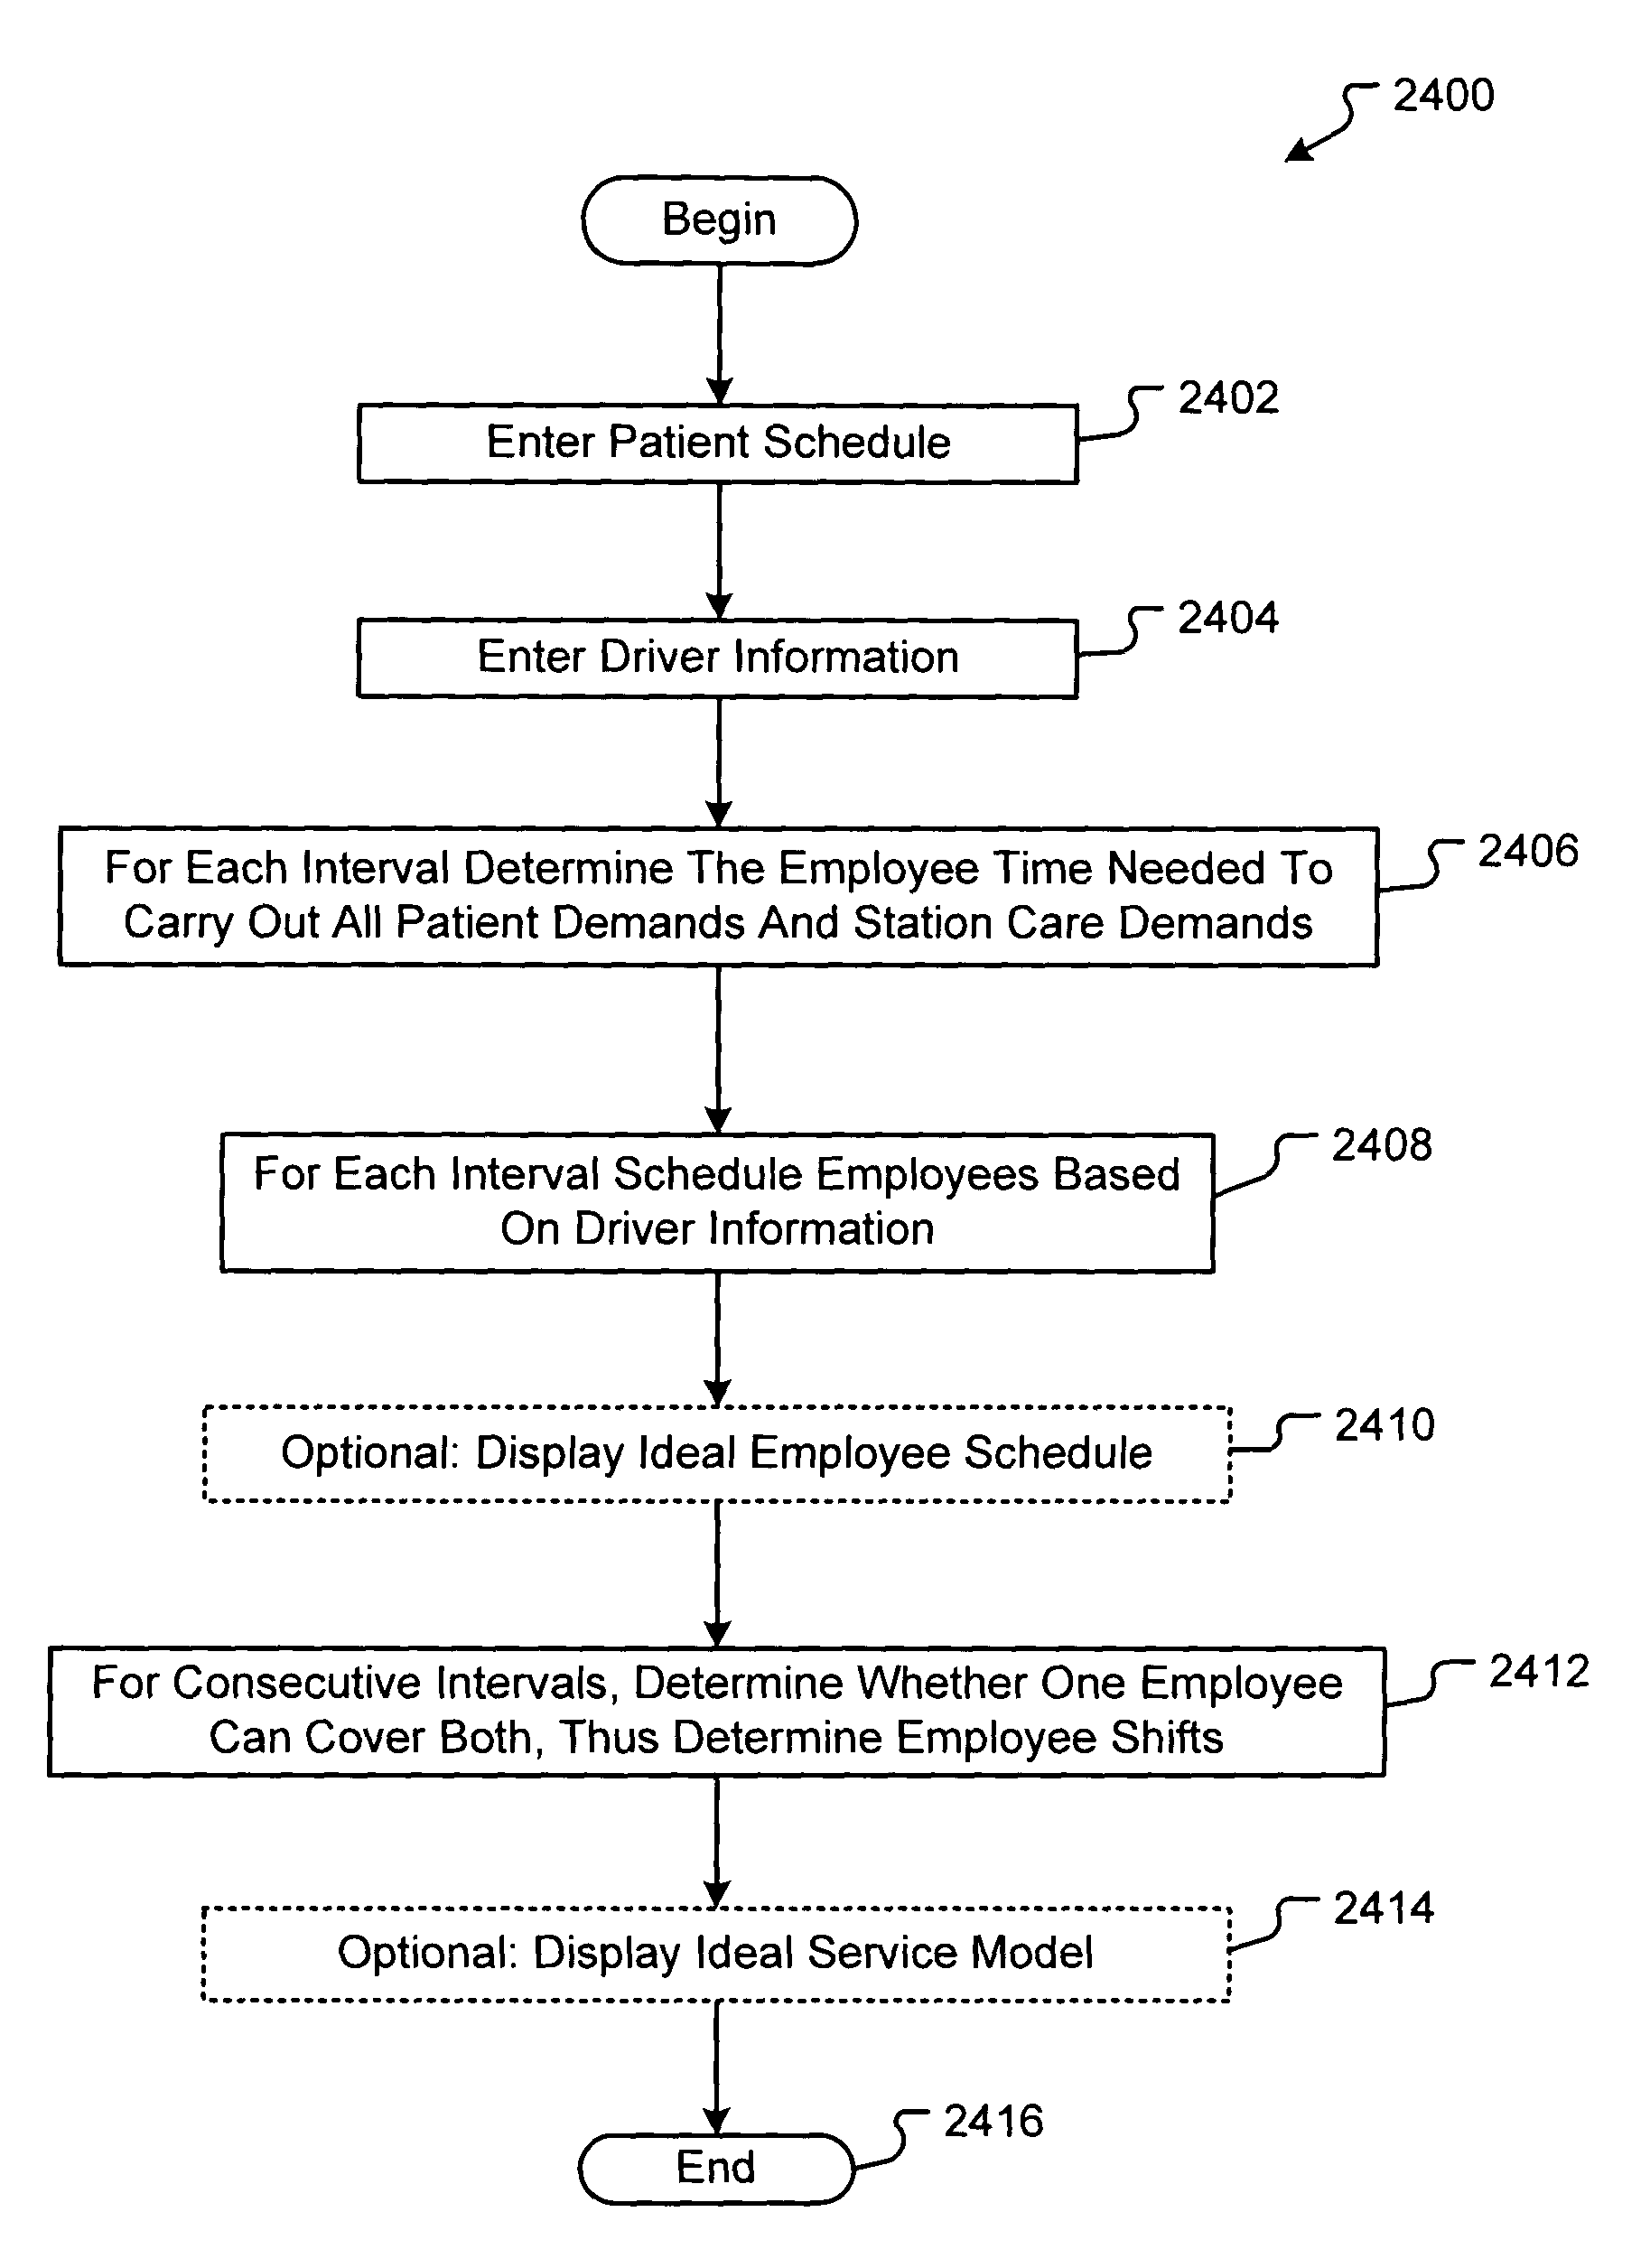 Method and system for optimizing employee scheduling in a patient care environment